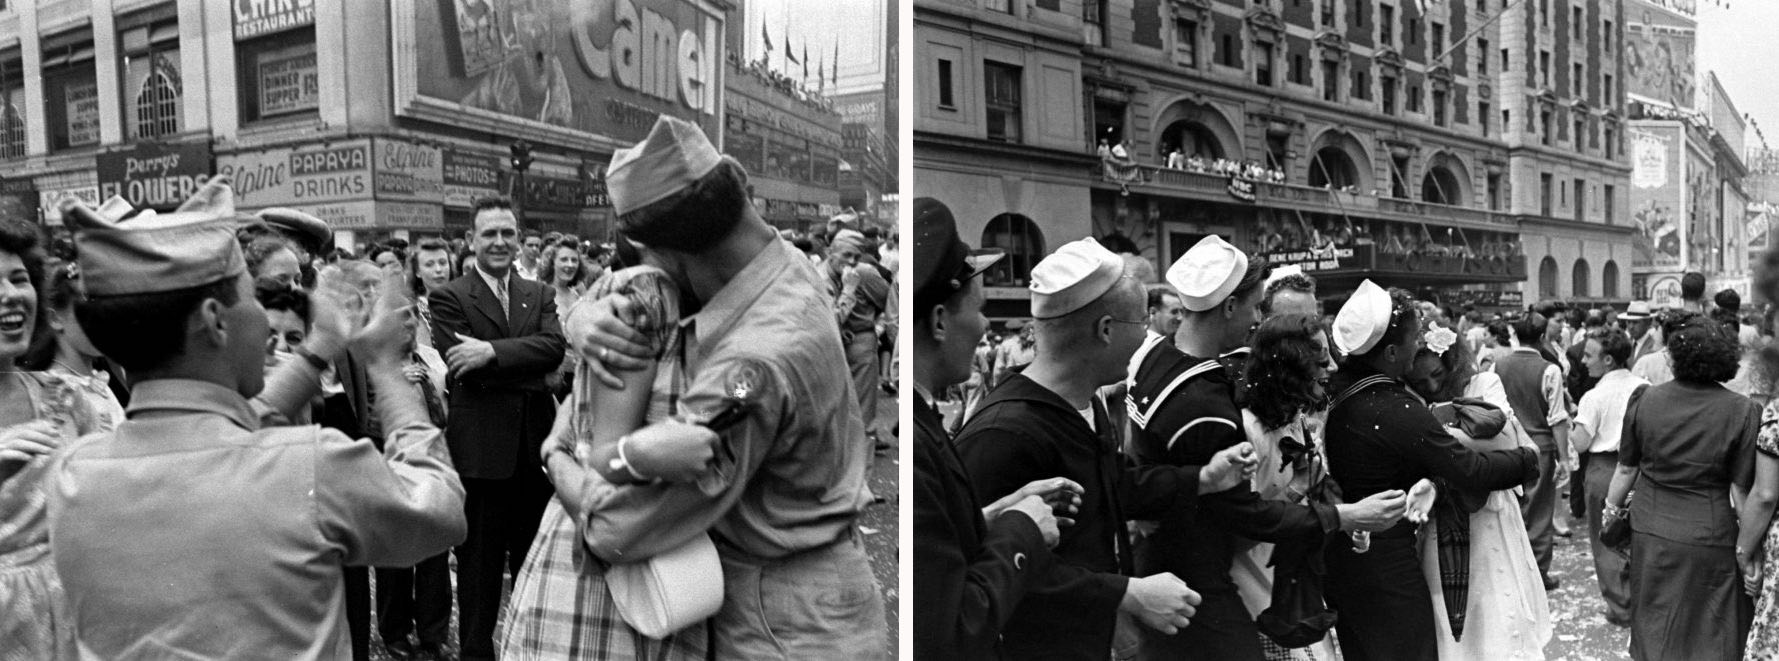 9 V J Day celebrations in Times Square August 14 1945 iFocus